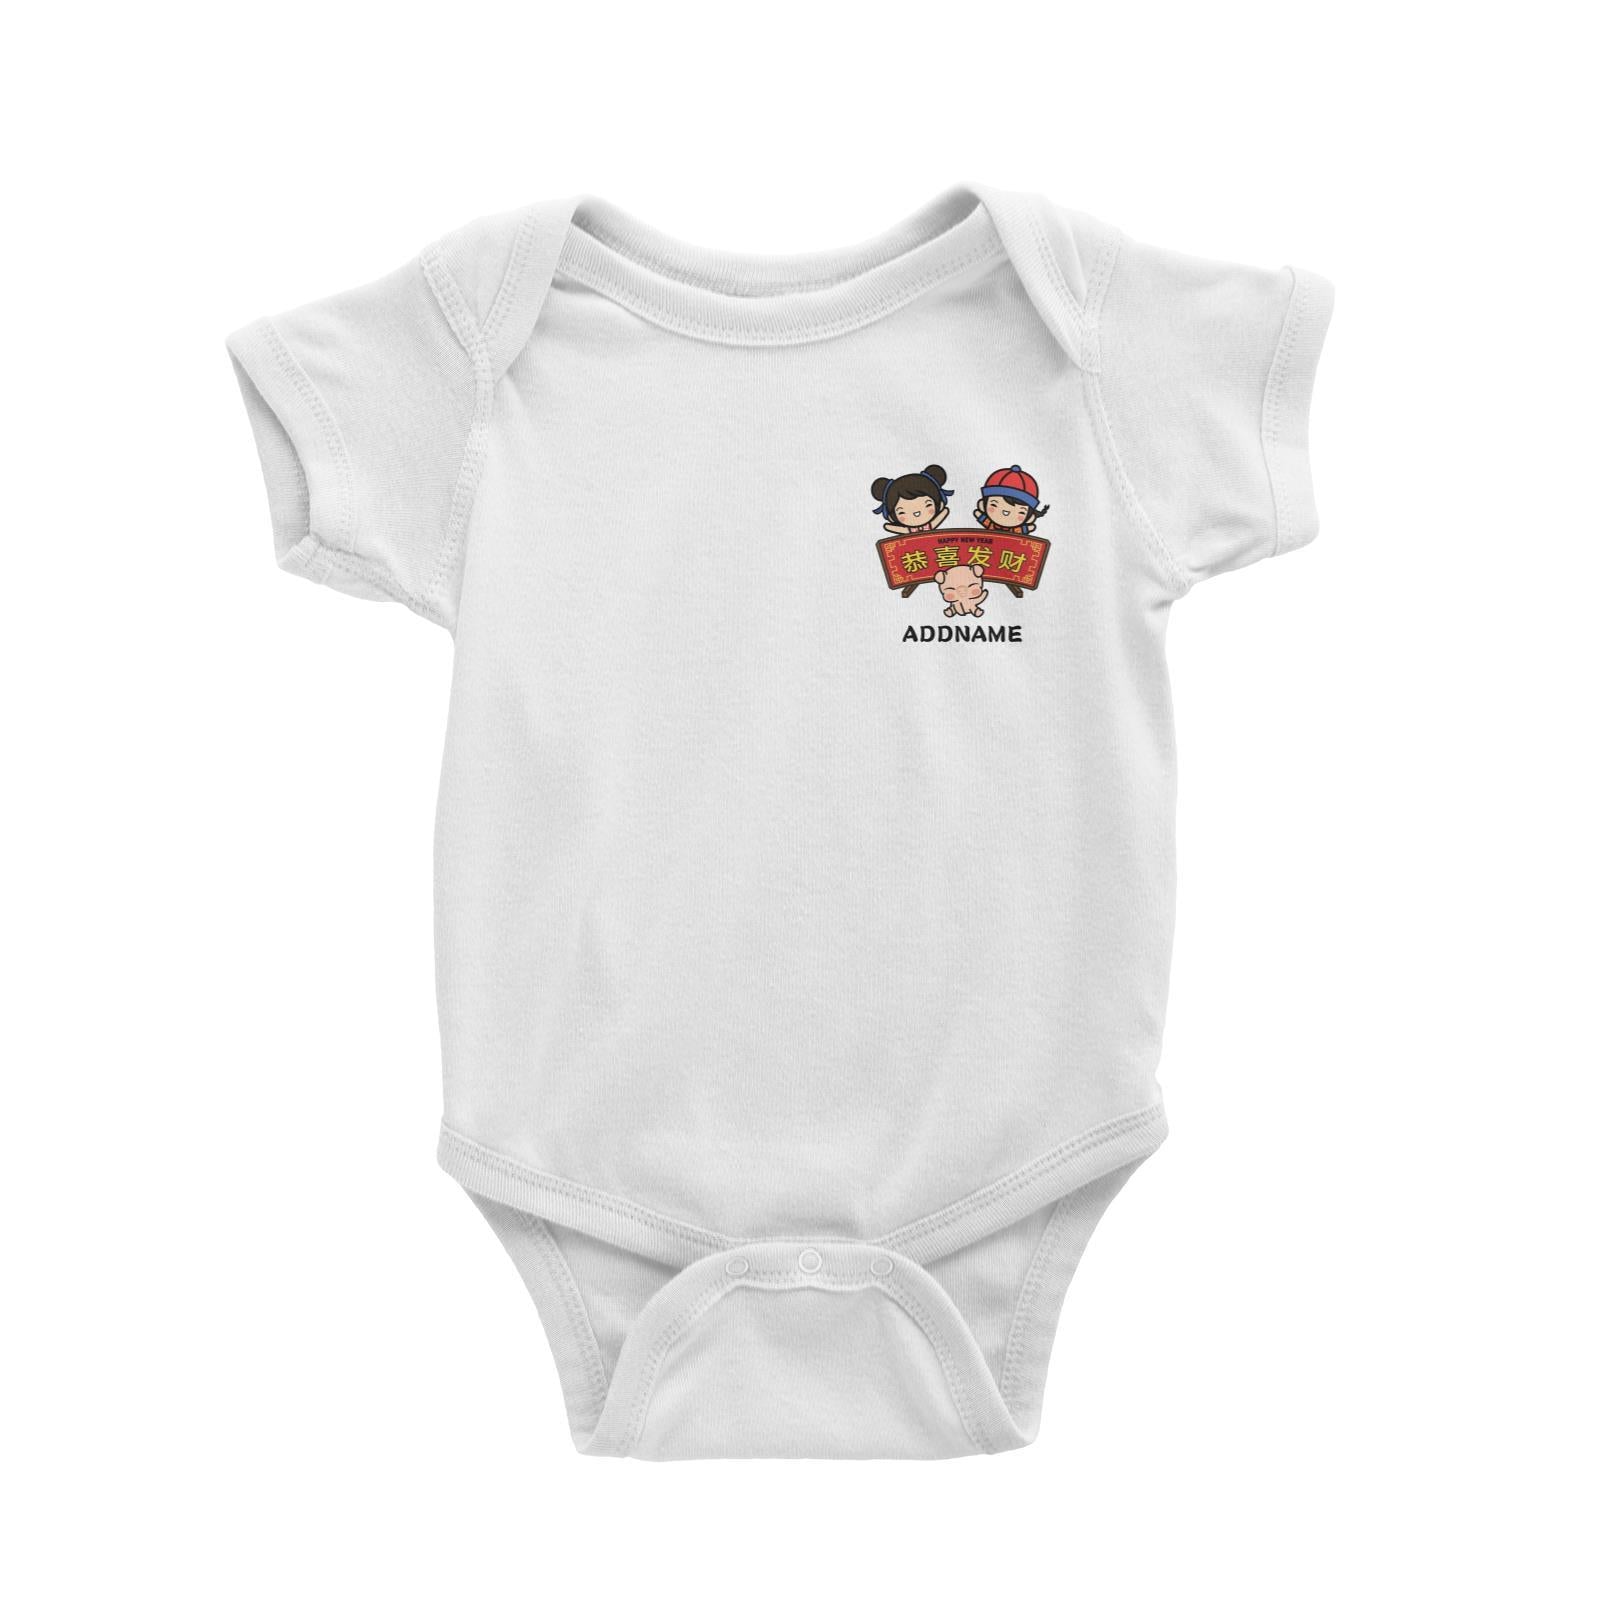 Prosperity Pig Boy, Girl And Baby Pig with Signage Pocket Design Baby Romper